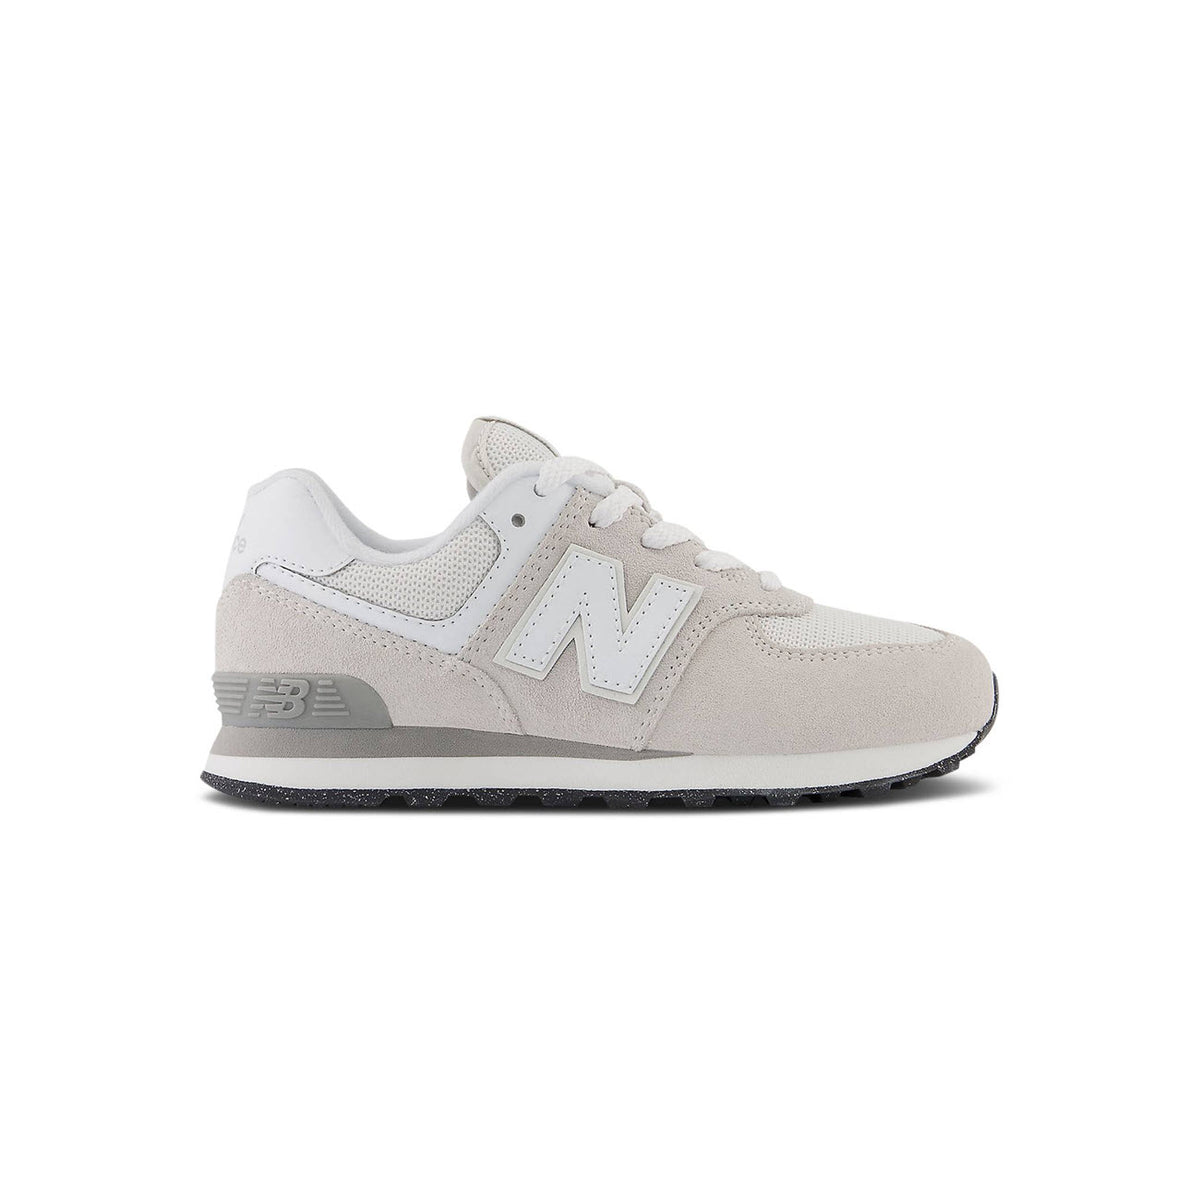 A single New Balance 574 Nimbus Cloud sneaker in light gray with a white &quot;N&quot; logo on the side, displayed against a pure white background.